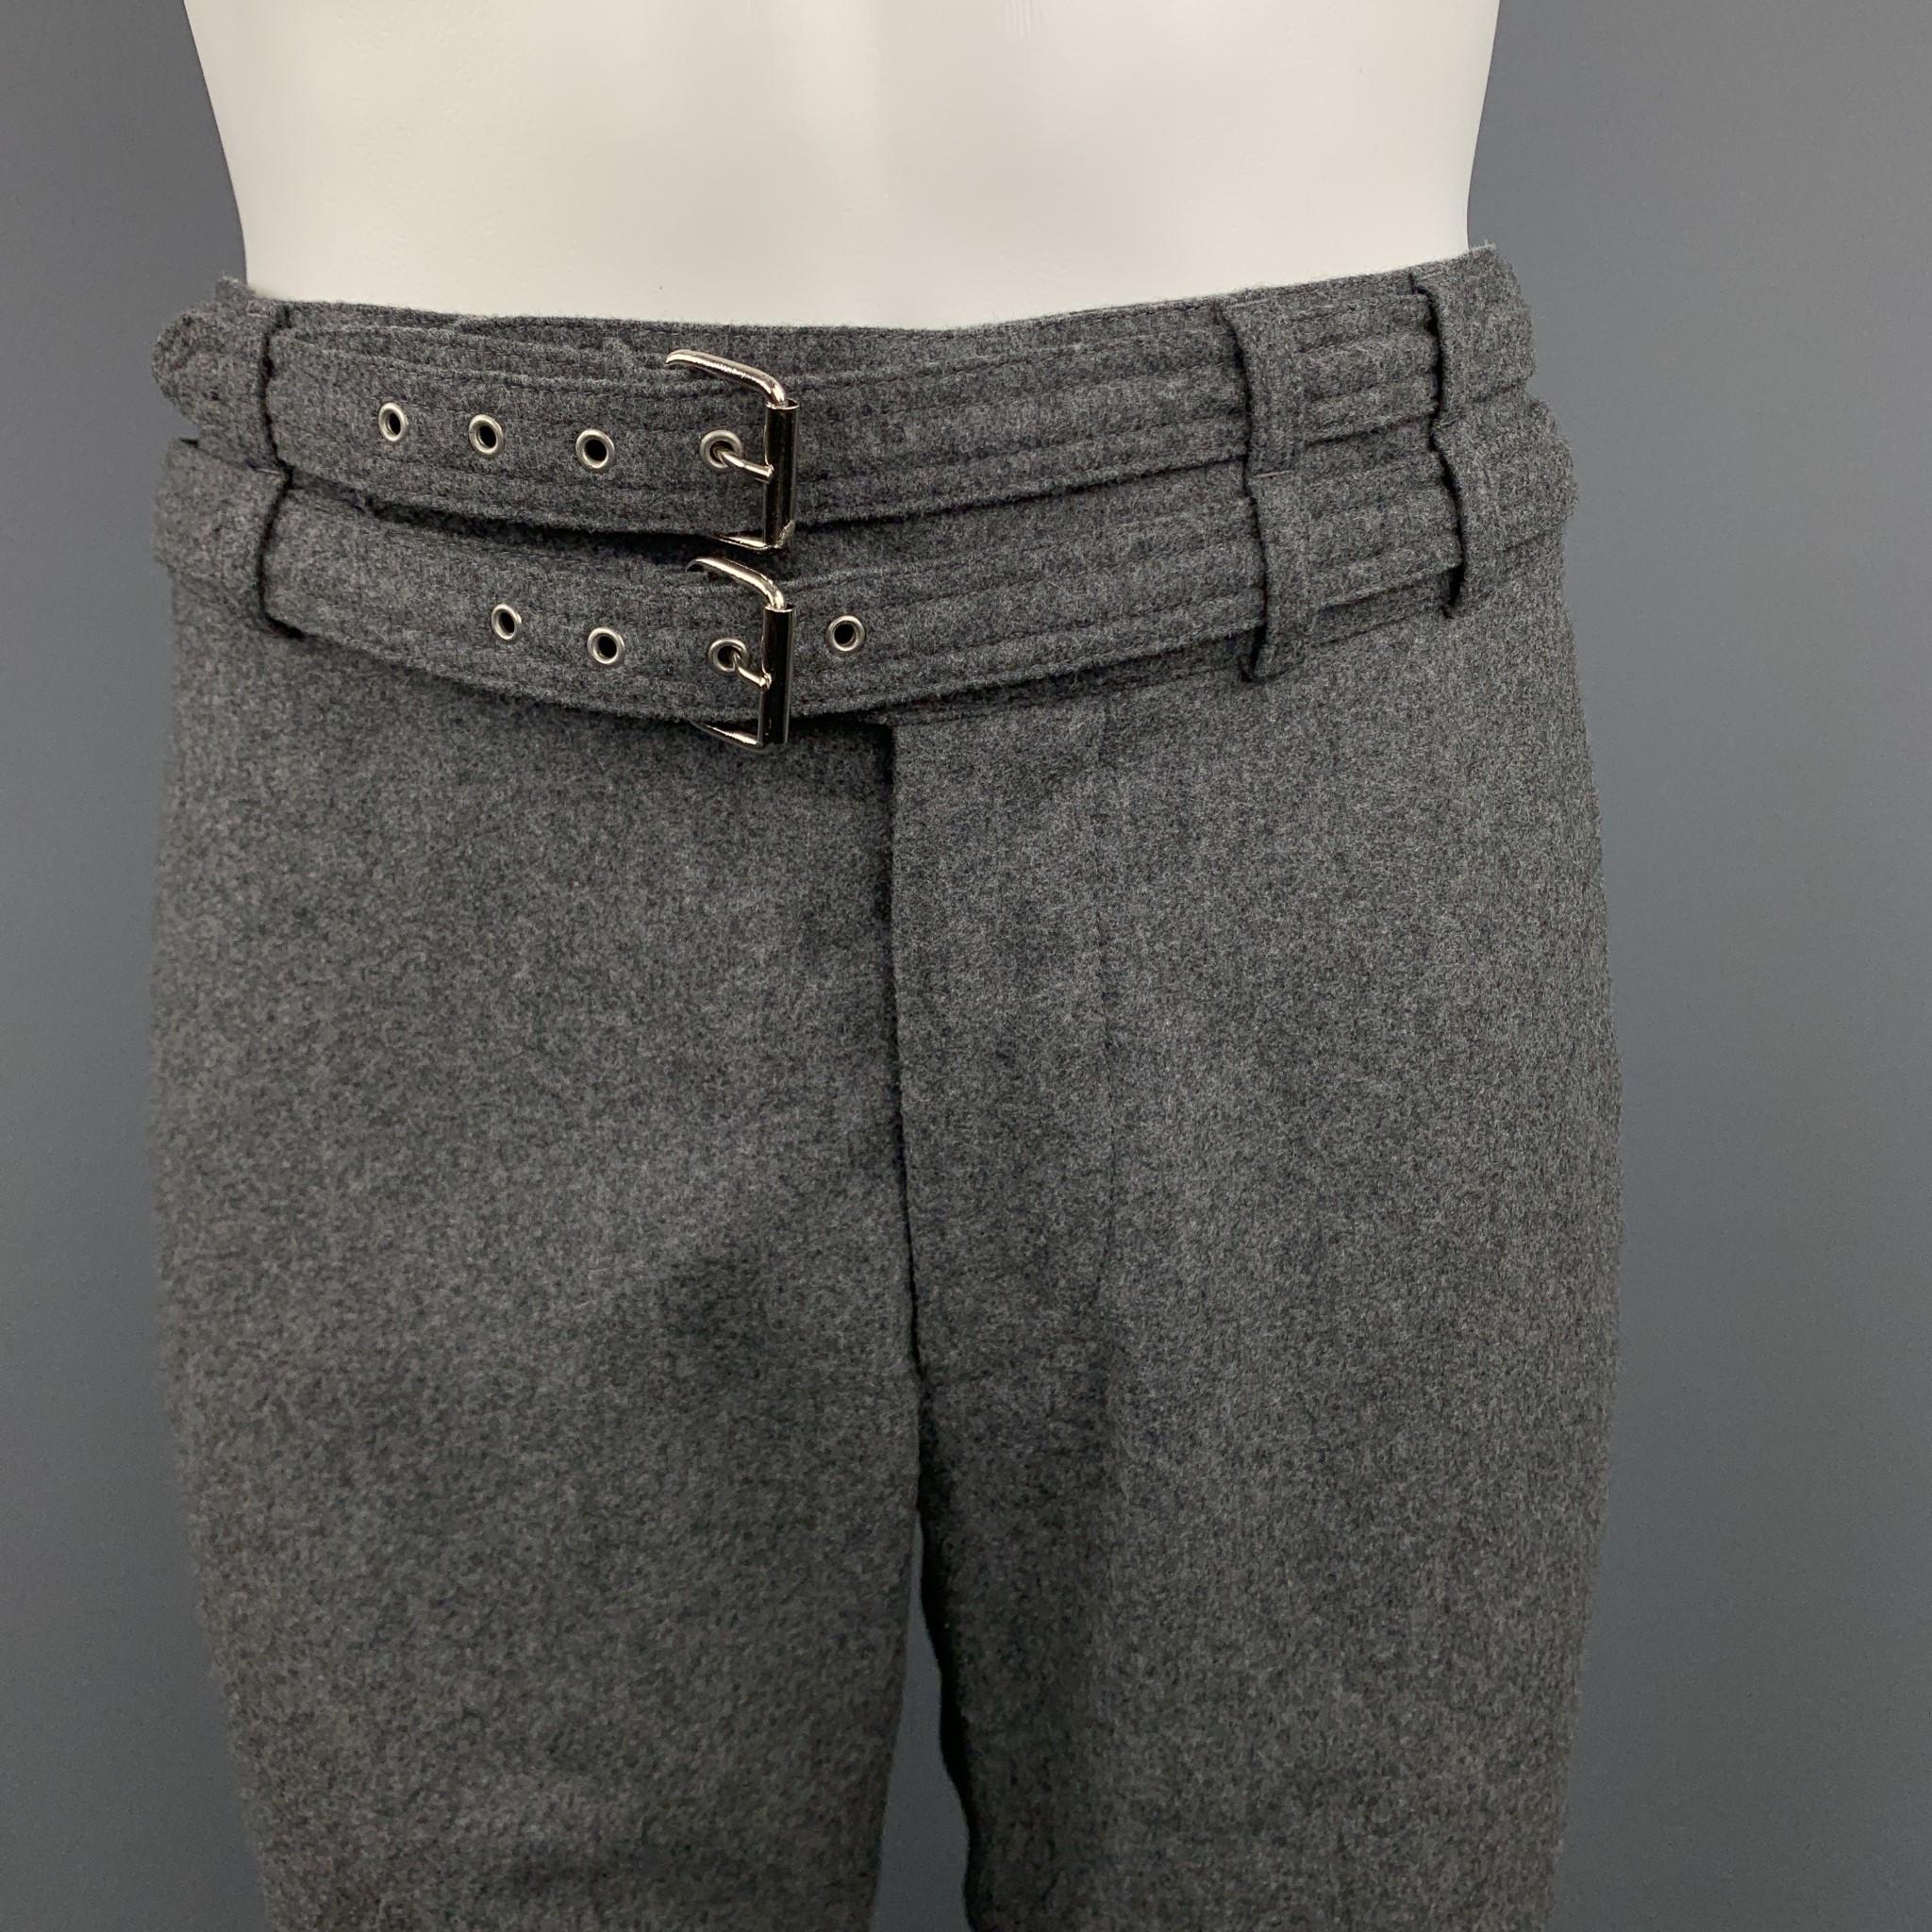 MICHAEL BASTIAN dress pants come in heathered grey wool felt with a tapered wide leg, cuffed hem, and double fabric belt waistband. Made in Italy.

Excellent Pre-Owned Condition.
Marked: IT 48

Measurements:

Waist: 34 in.
Rise: 11 in.
Inseam: 29